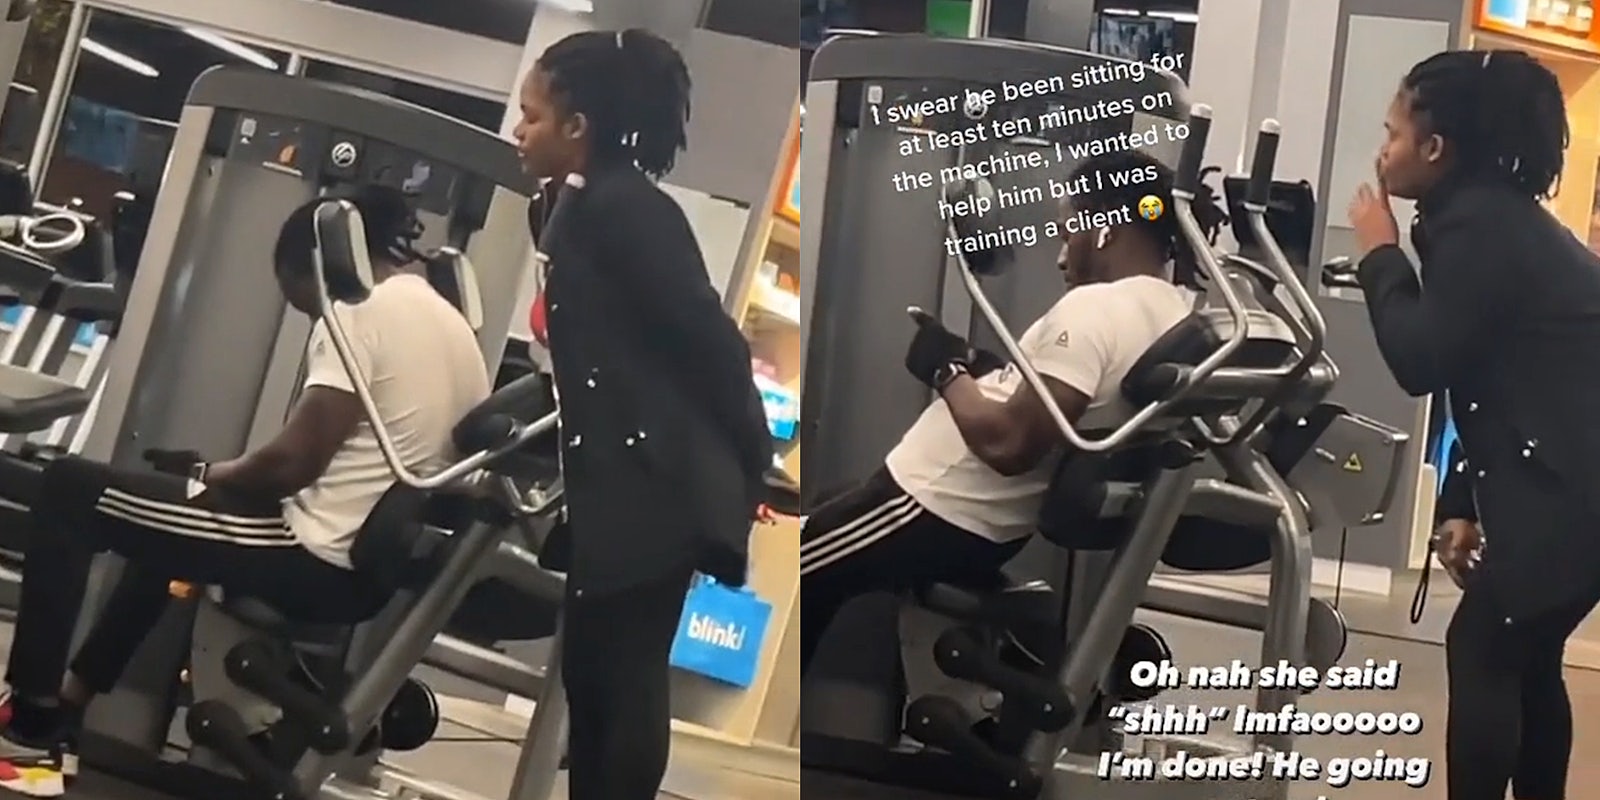 young woman looking over a man's shoulder in the gym while he uses his phone with caption 'I swear he been sitting at least ten minutes on the machine, I wanted to help him but I was training a client' and 'Oh nah she said shhh lmfaoooo I'm done! He going'